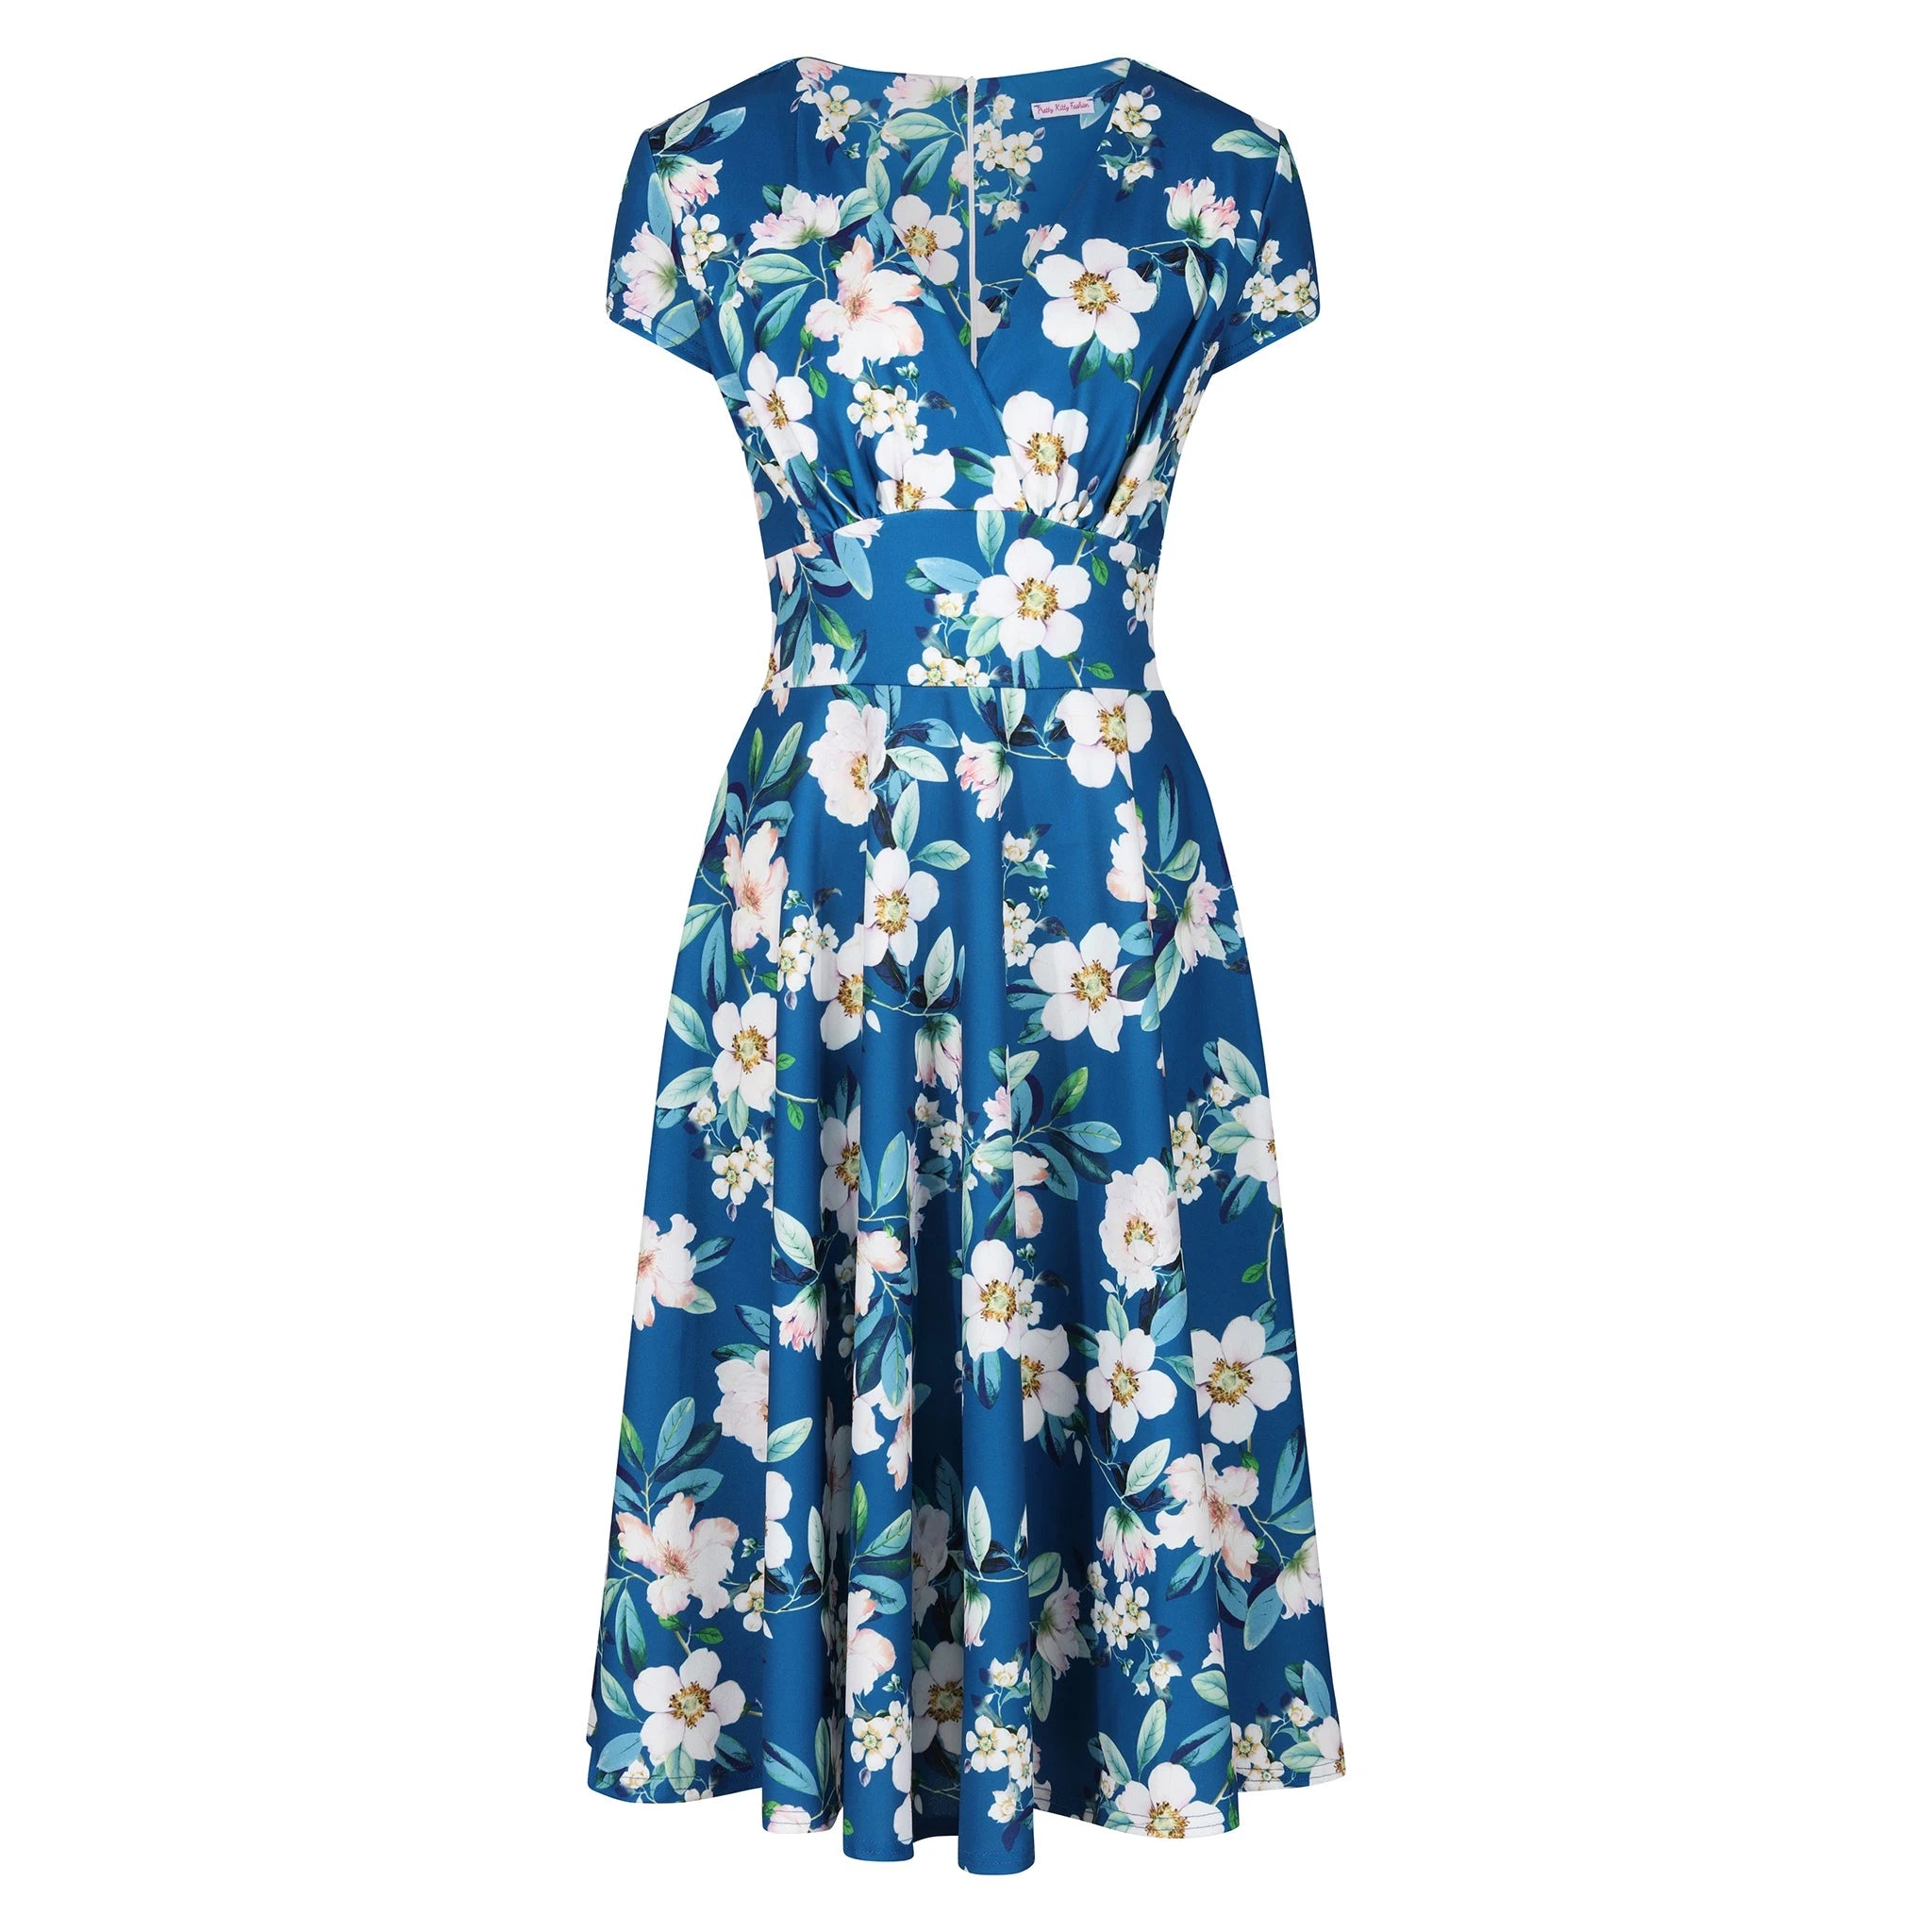 Teal Blue Floral Wrap Top A Line Swing Tea Dress With Cap Sleeves